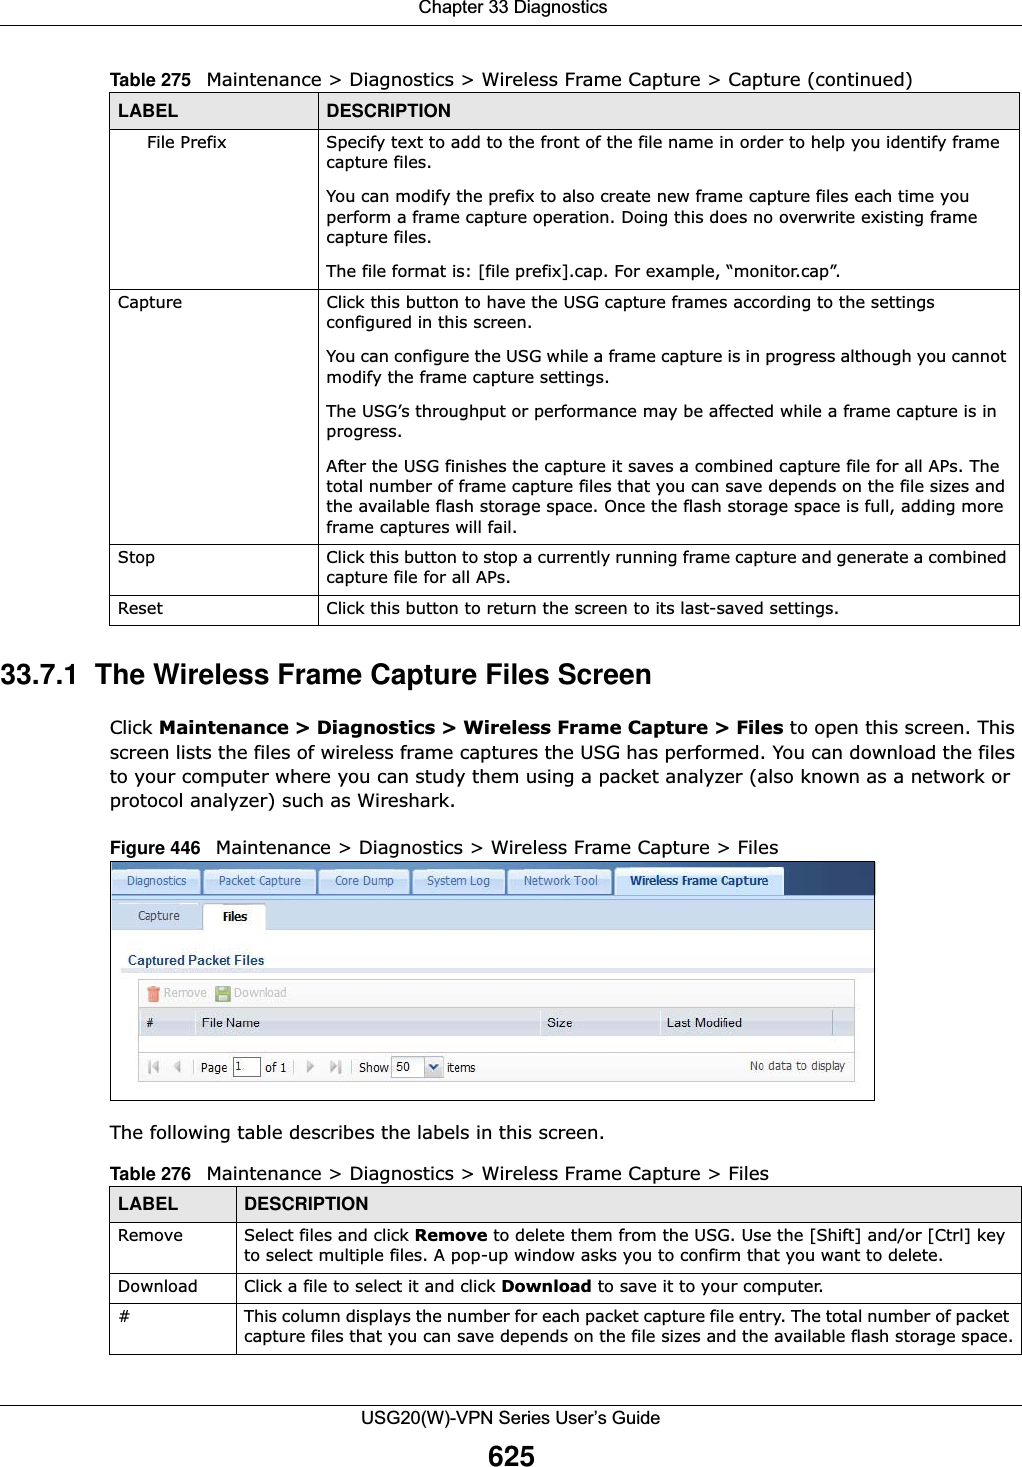  Chapter 33 DiagnosticsUSG20(W)-VPN Series User’s Guide62533.7.1  The Wireless Frame Capture Files Screen Click Maintenance &gt; Diagnostics &gt; Wireless Frame Capture &gt; Files to open this screen. This screen lists the files of wireless frame captures the USG has performed. You can download the files to your computer where you can study them using a packet analyzer (also known as a network or protocol analyzer) such as Wireshark.Figure 446   Maintenance &gt; Diagnostics &gt; Wireless Frame Capture &gt; Files  The following table describes the labels in this screen. File Prefix Specify text to add to the front of the file name in order to help you identify frame capture files.You can modify the prefix to also create new frame capture files each time you perform a frame capture operation. Doing this does no overwrite existing frame capture files.The file format is: [file prefix].cap. For example, “monitor.cap”.Capture Click this button to have the USG capture frames according to the settings configured in this screen. You can configure the USG while a frame capture is in progress although you cannot modify the frame capture settings.The USG’s throughput or performance may be affected while a frame capture is in progress.After the USG finishes the capture it saves a combined capture file for all APs. The total number of frame capture files that you can save depends on the file sizes and the available flash storage space. Once the flash storage space is full, adding more frame captures will fail.Stop Click this button to stop a currently running frame capture and generate a combined capture file for all APs. Reset Click this button to return the screen to its last-saved settings. Table 275   Maintenance &gt; Diagnostics &gt; Wireless Frame Capture &gt; Capture (continued)LABEL DESCRIPTIONTable 276   Maintenance &gt; Diagnostics &gt; Wireless Frame Capture &gt; FilesLABEL DESCRIPTIONRemove Select files and click Remove to delete them from the USG. Use the [Shift] and/or [Ctrl] key to select multiple files. A pop-up window asks you to confirm that you want to delete.Download Click a file to select it and click Download to save it to your computer.#This column displays the number for each packet capture file entry. The total number of packet capture files that you can save depends on the file sizes and the available flash storage space.